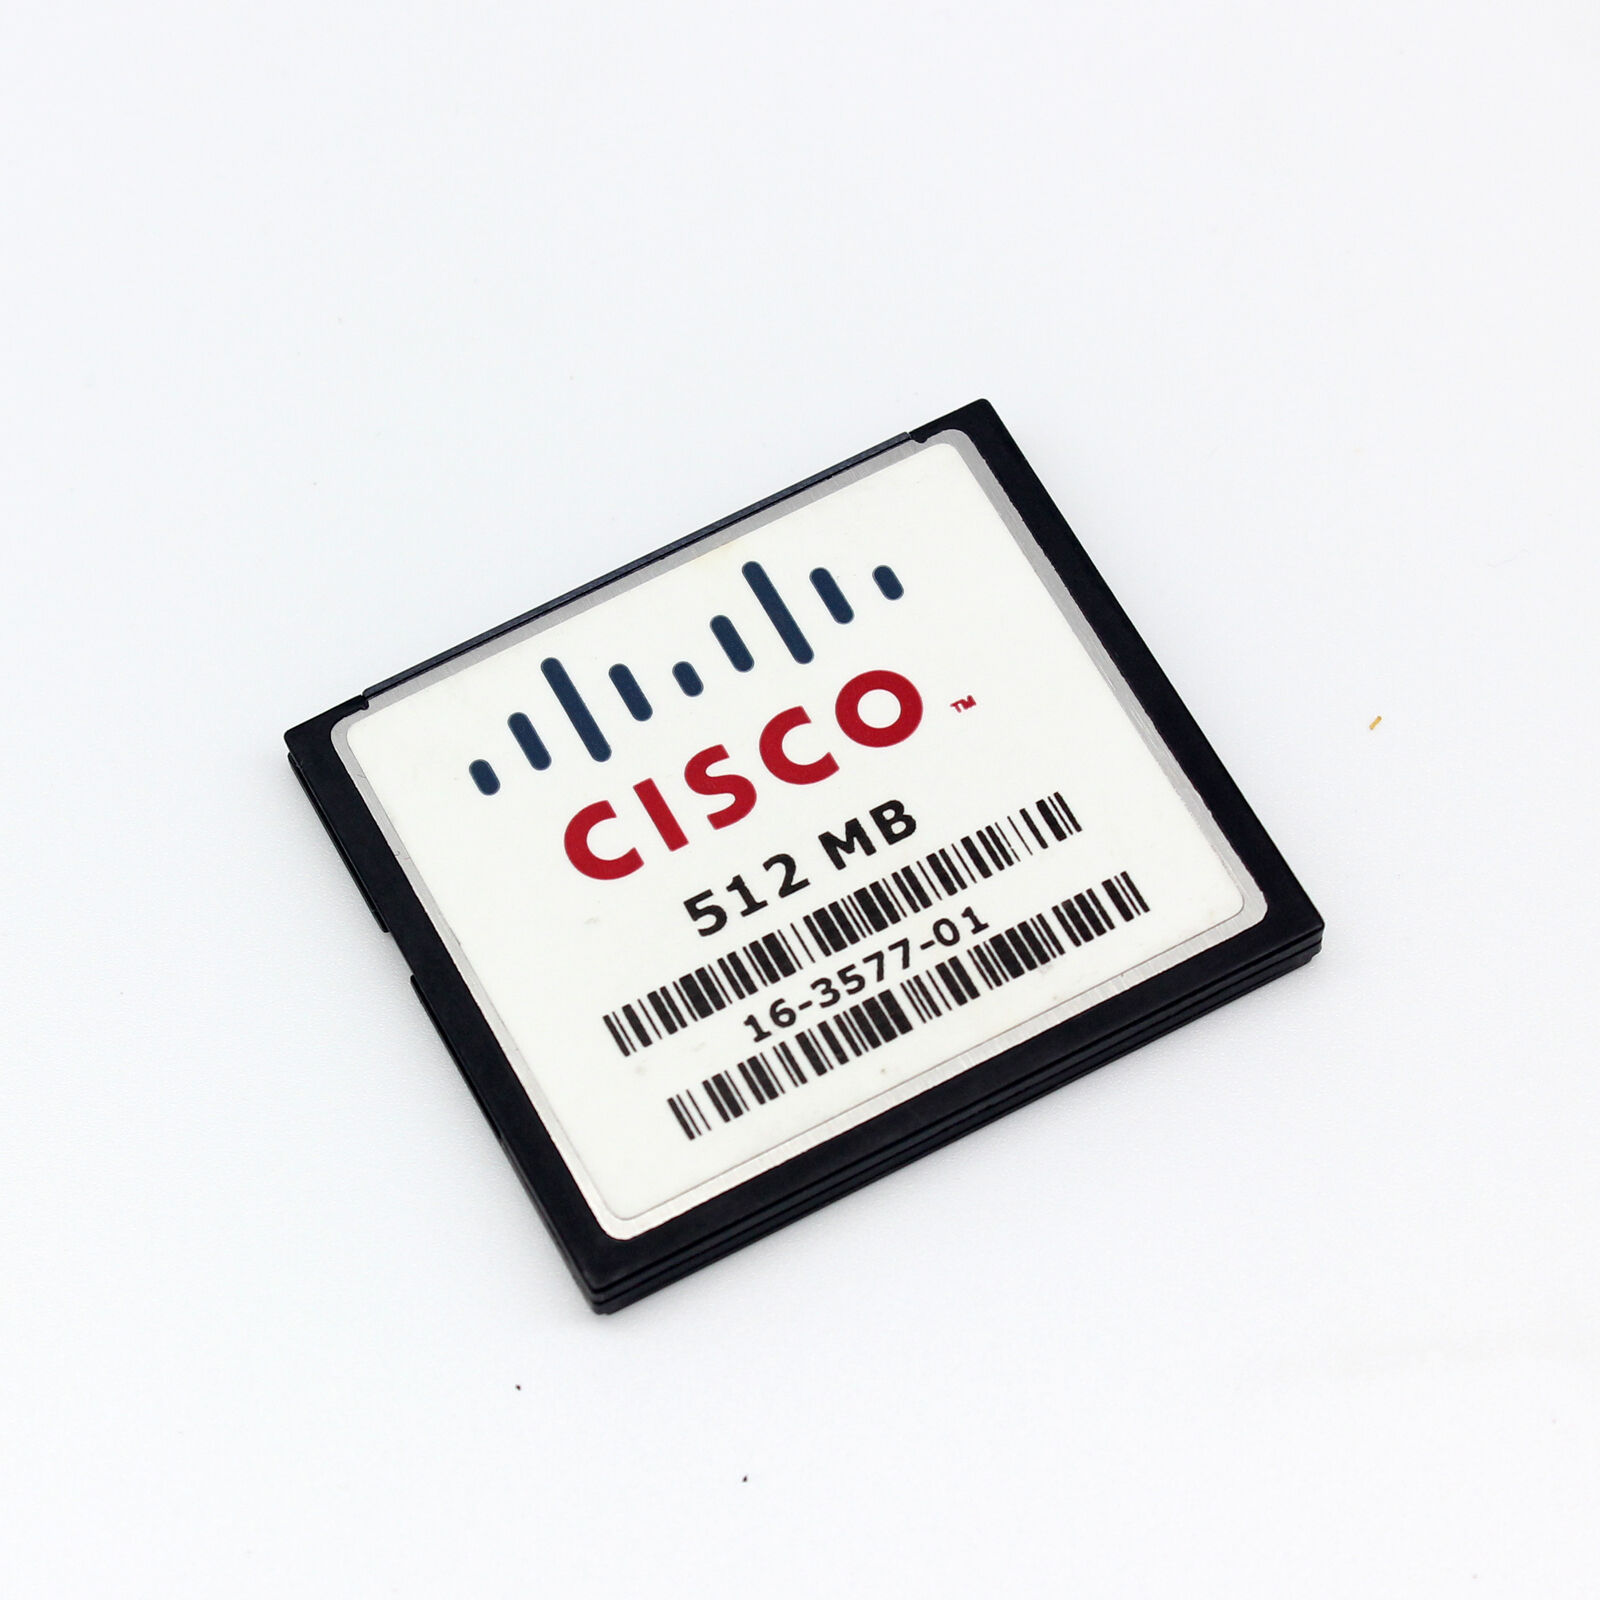 CISCO 512MB CF CompactFlash Card, Industrial Memory Card with Plastic case